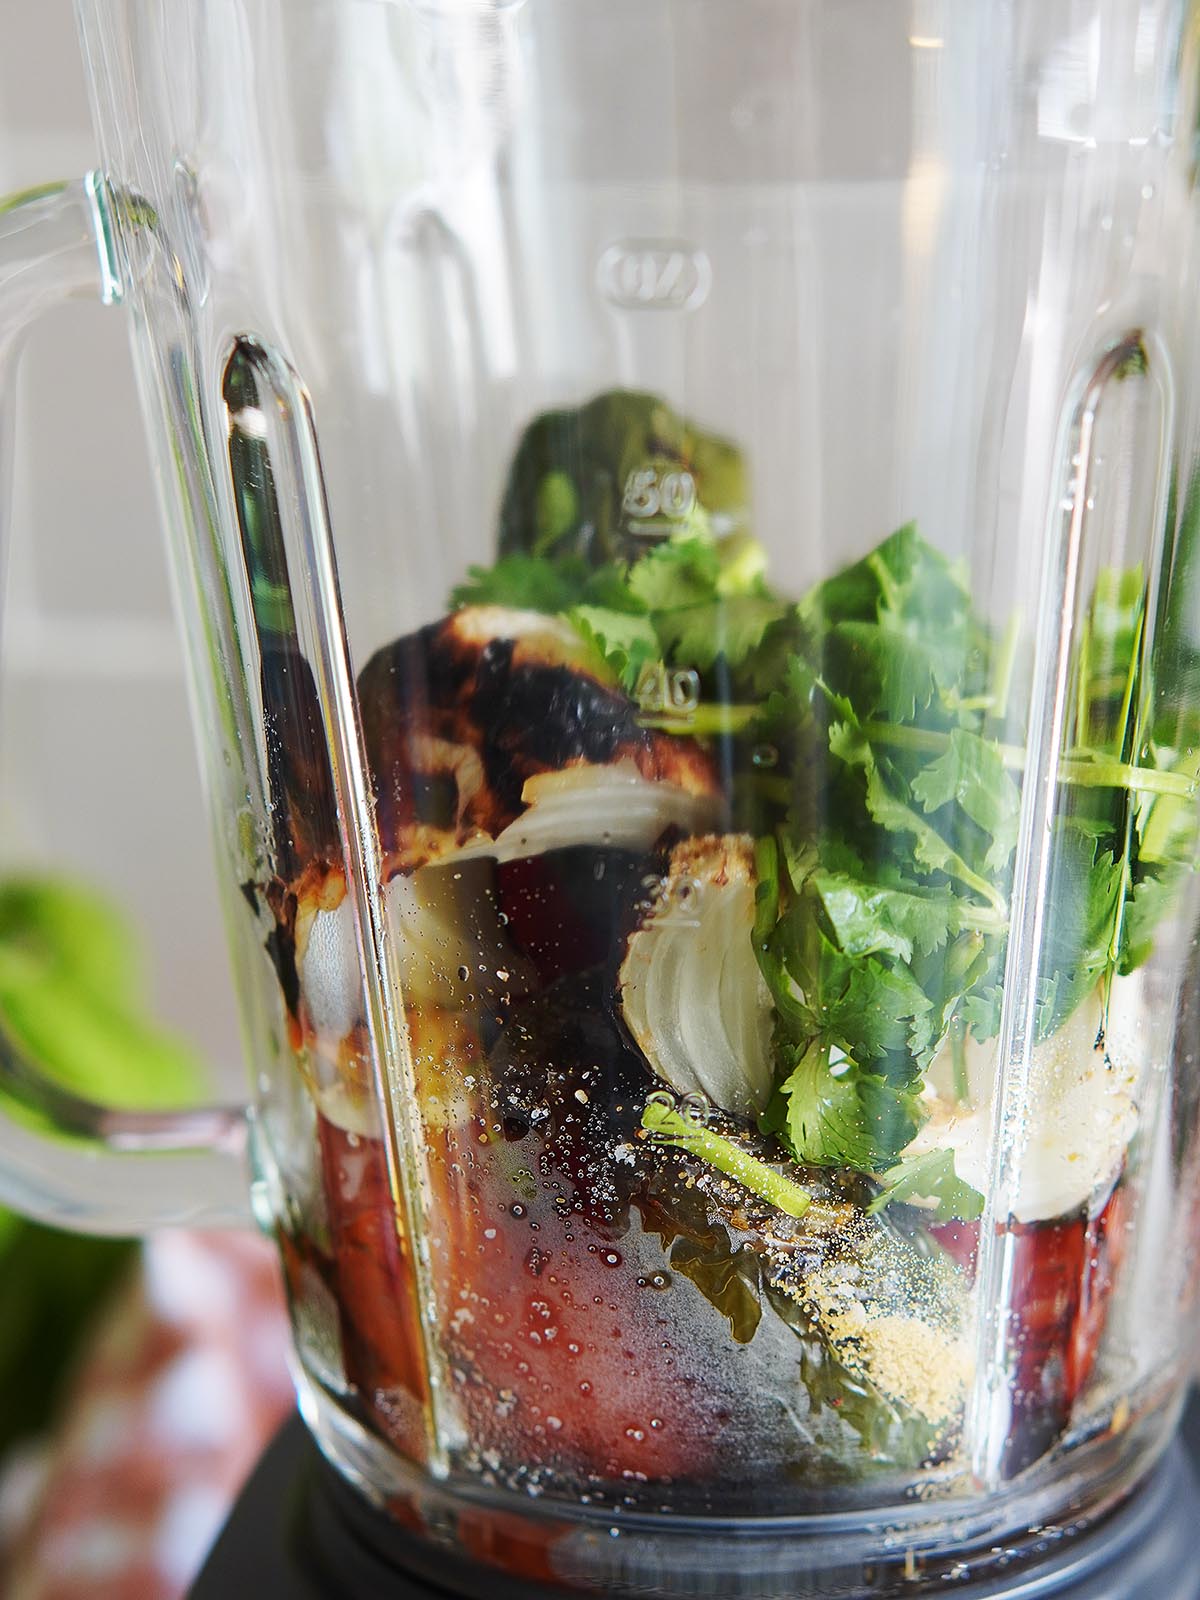 All of the ingredients including fresh cilantro inside a blender's cup.